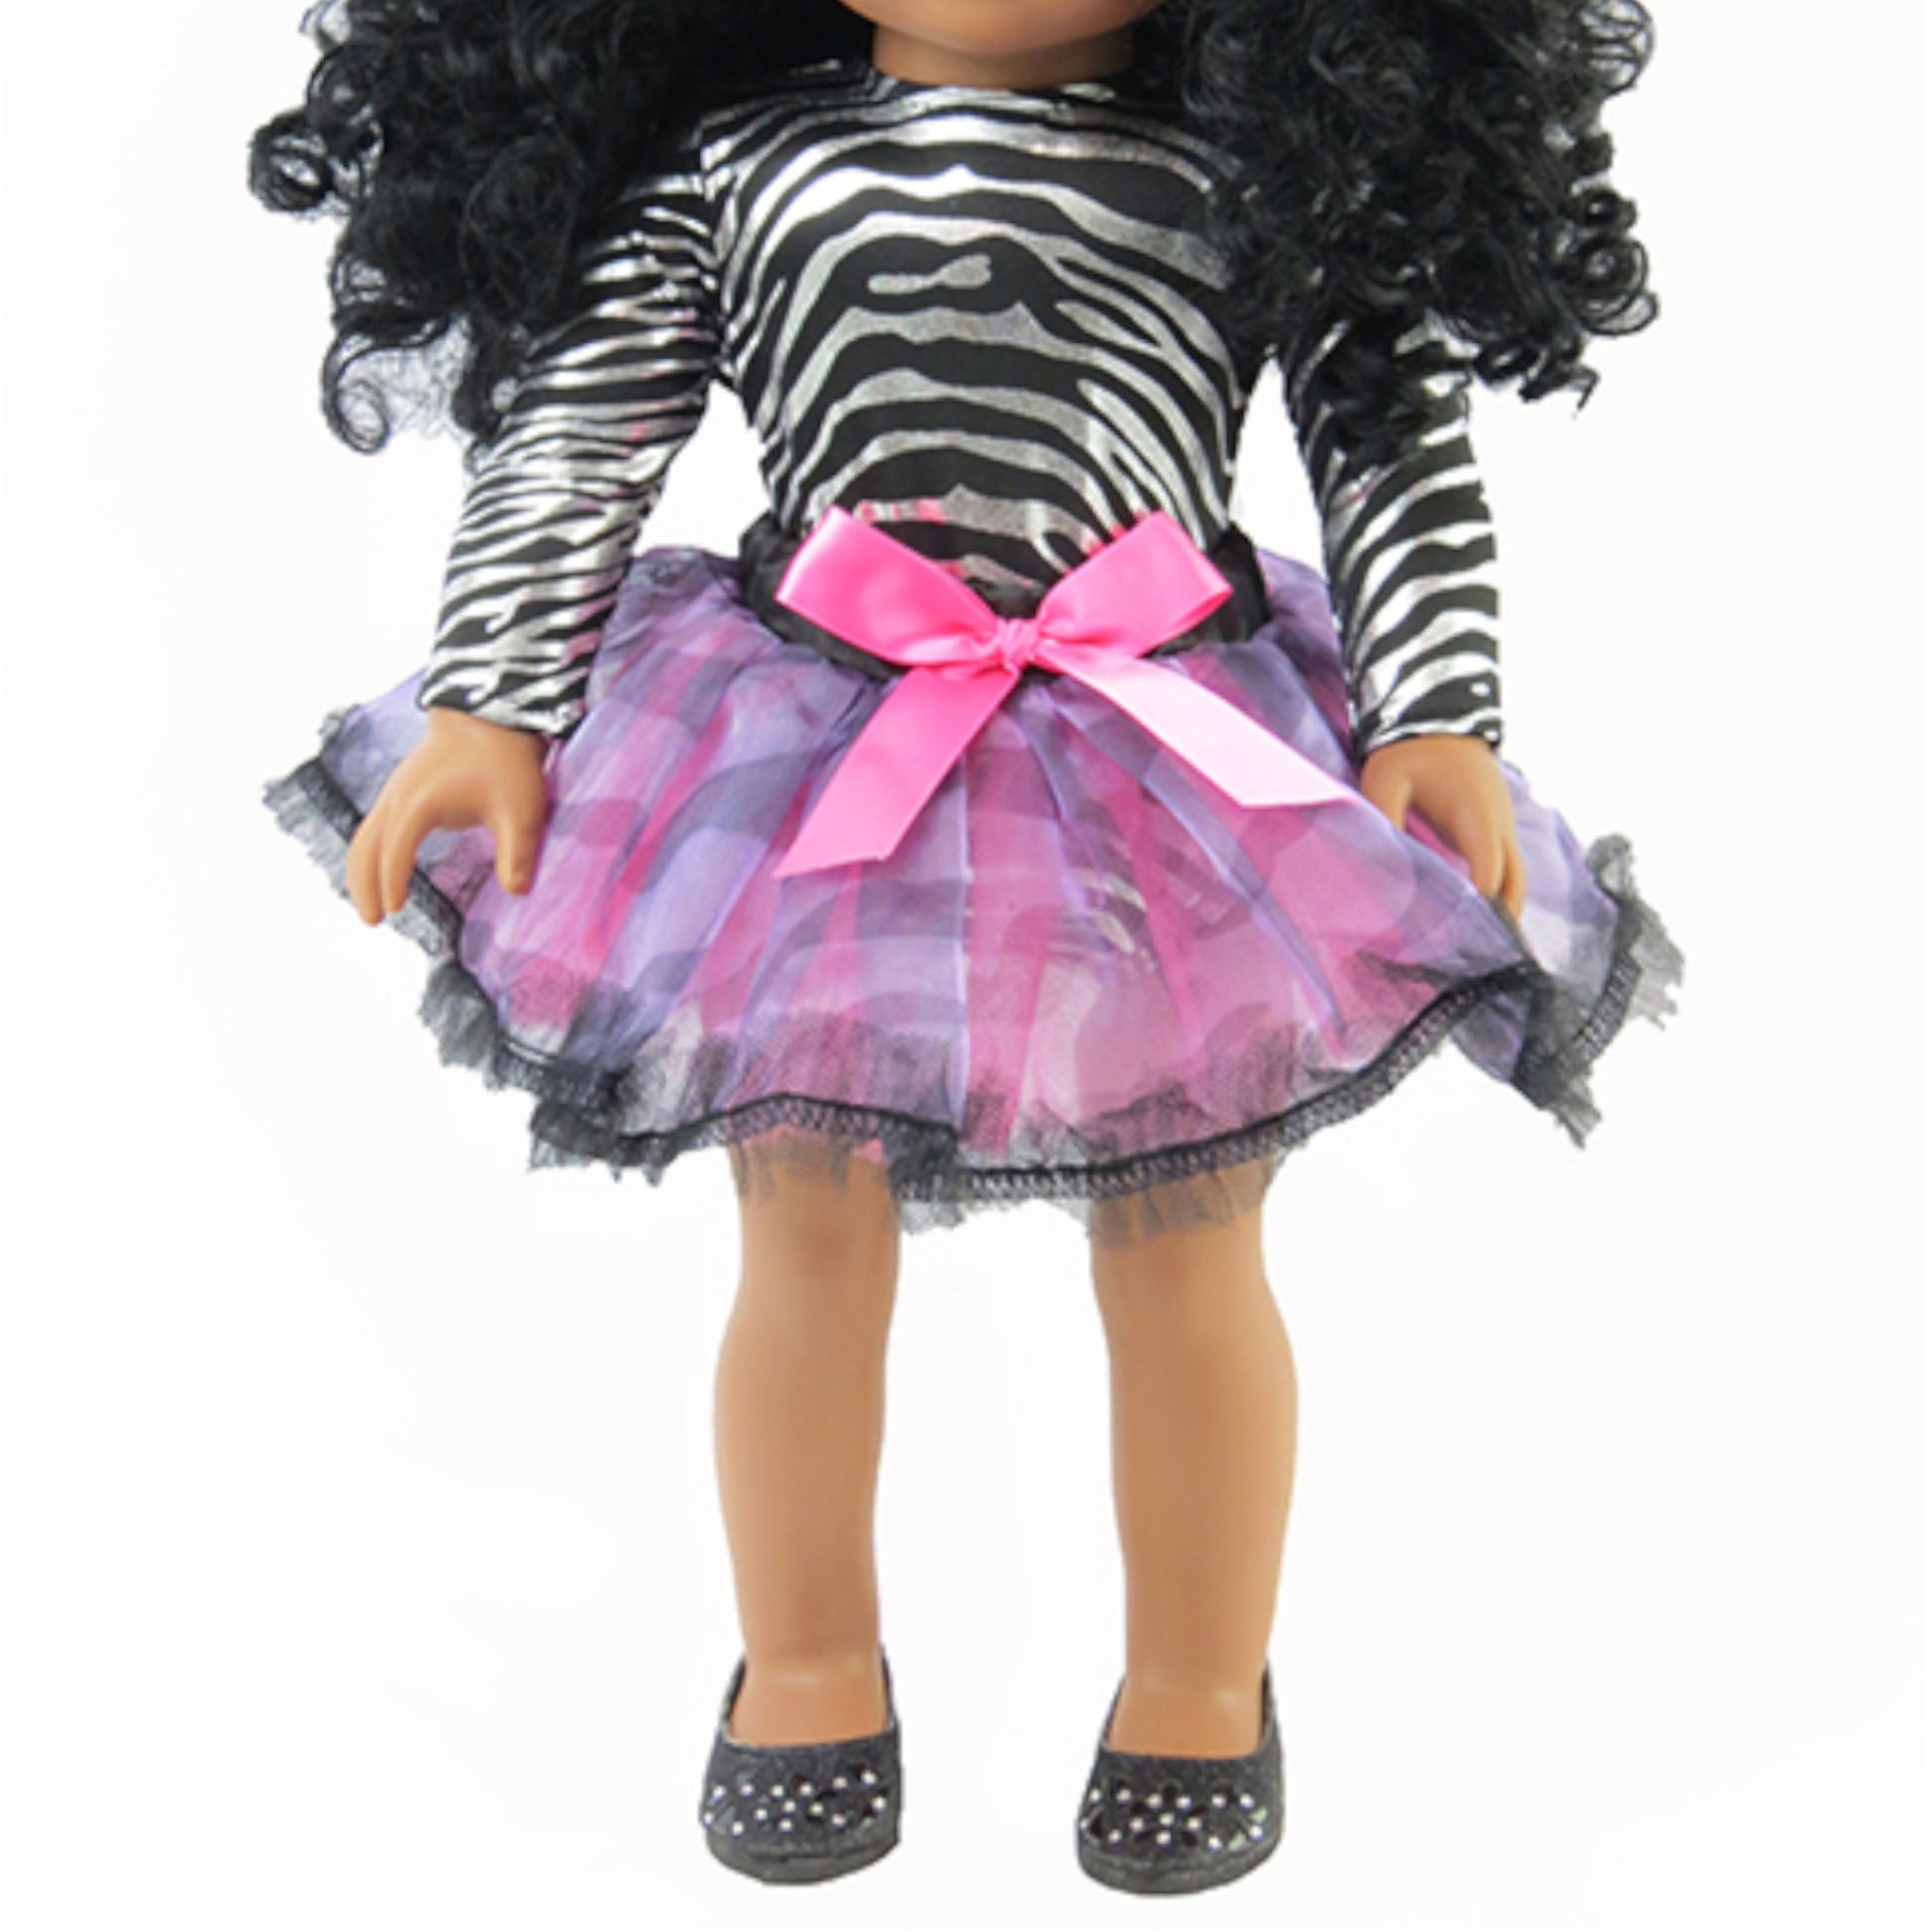 Zebra Leotard Dance Outfit with Tutu for 18-inch dolls with doll